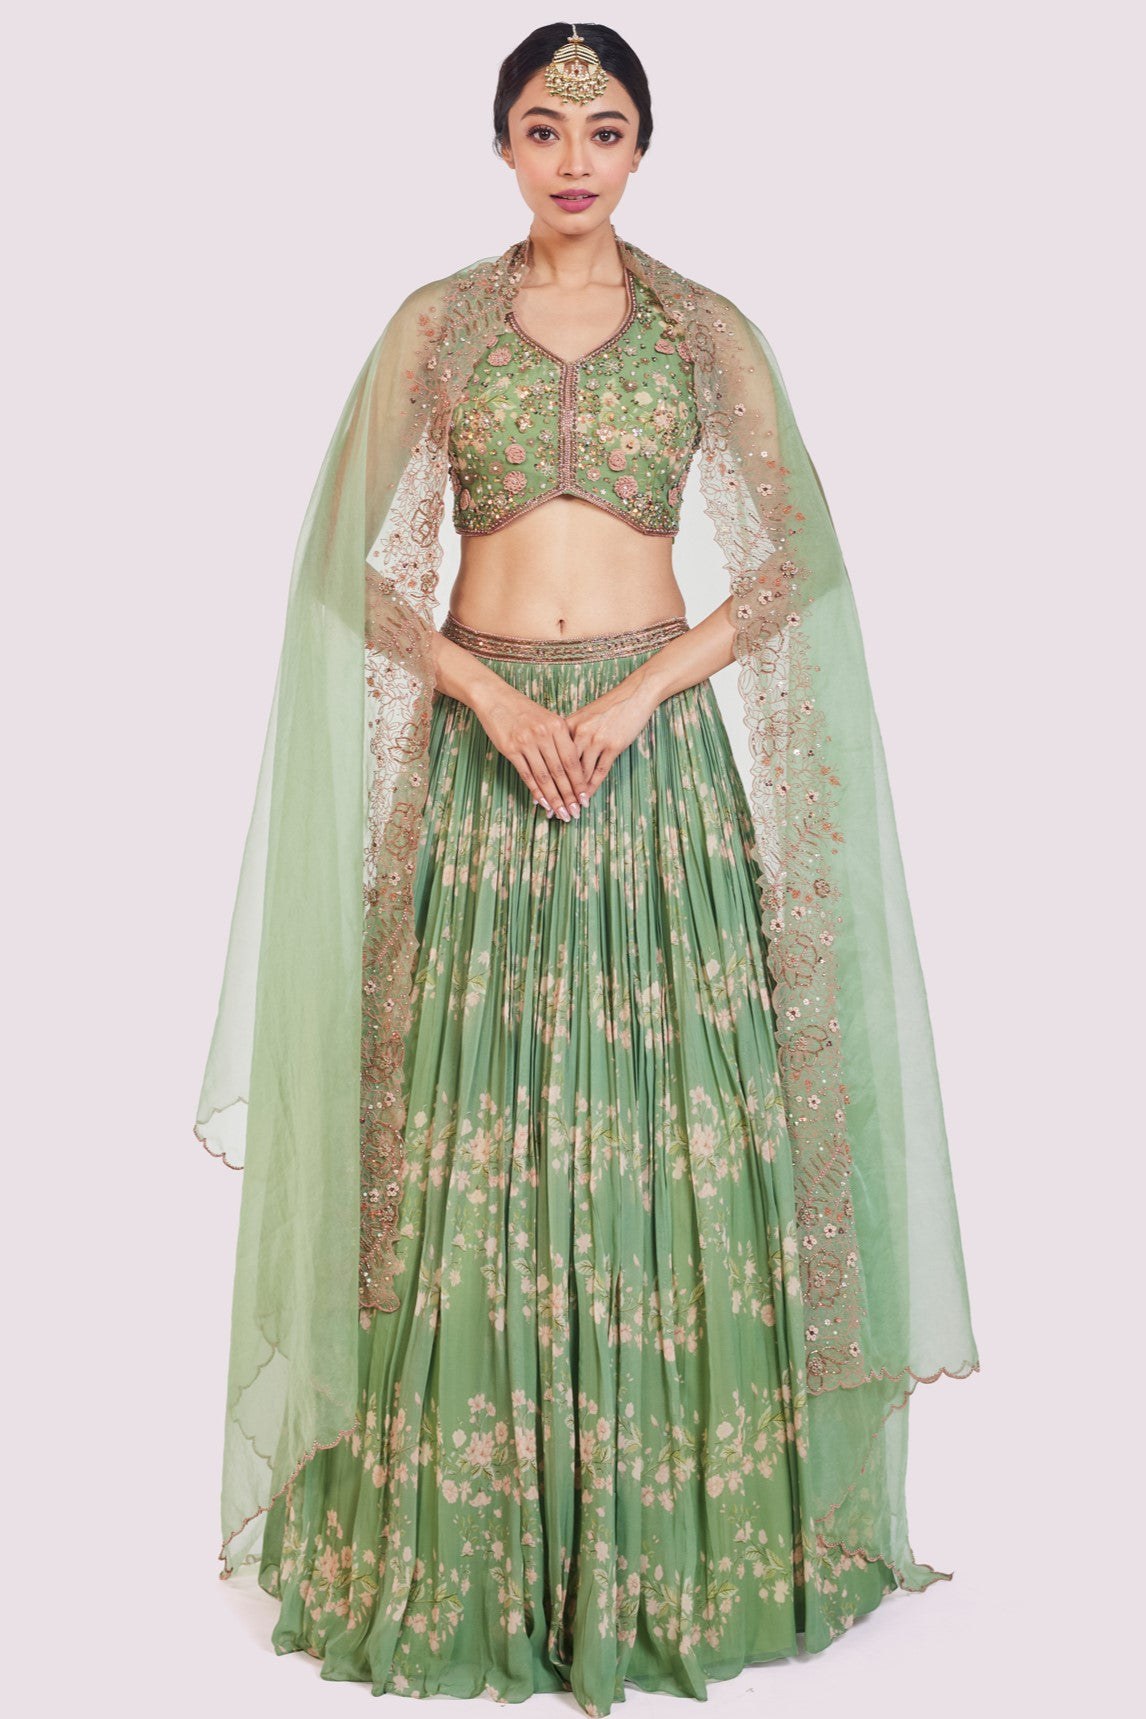 Buy sea green printed embellished georgette lehenga online in USA. Shop the best and latest designs in embroidered sarees, designer sarees, Anarkali suit, lehengas, sharara suits for weddings and special occasions from Pure Elegance Indian fashion store in USA.-full view